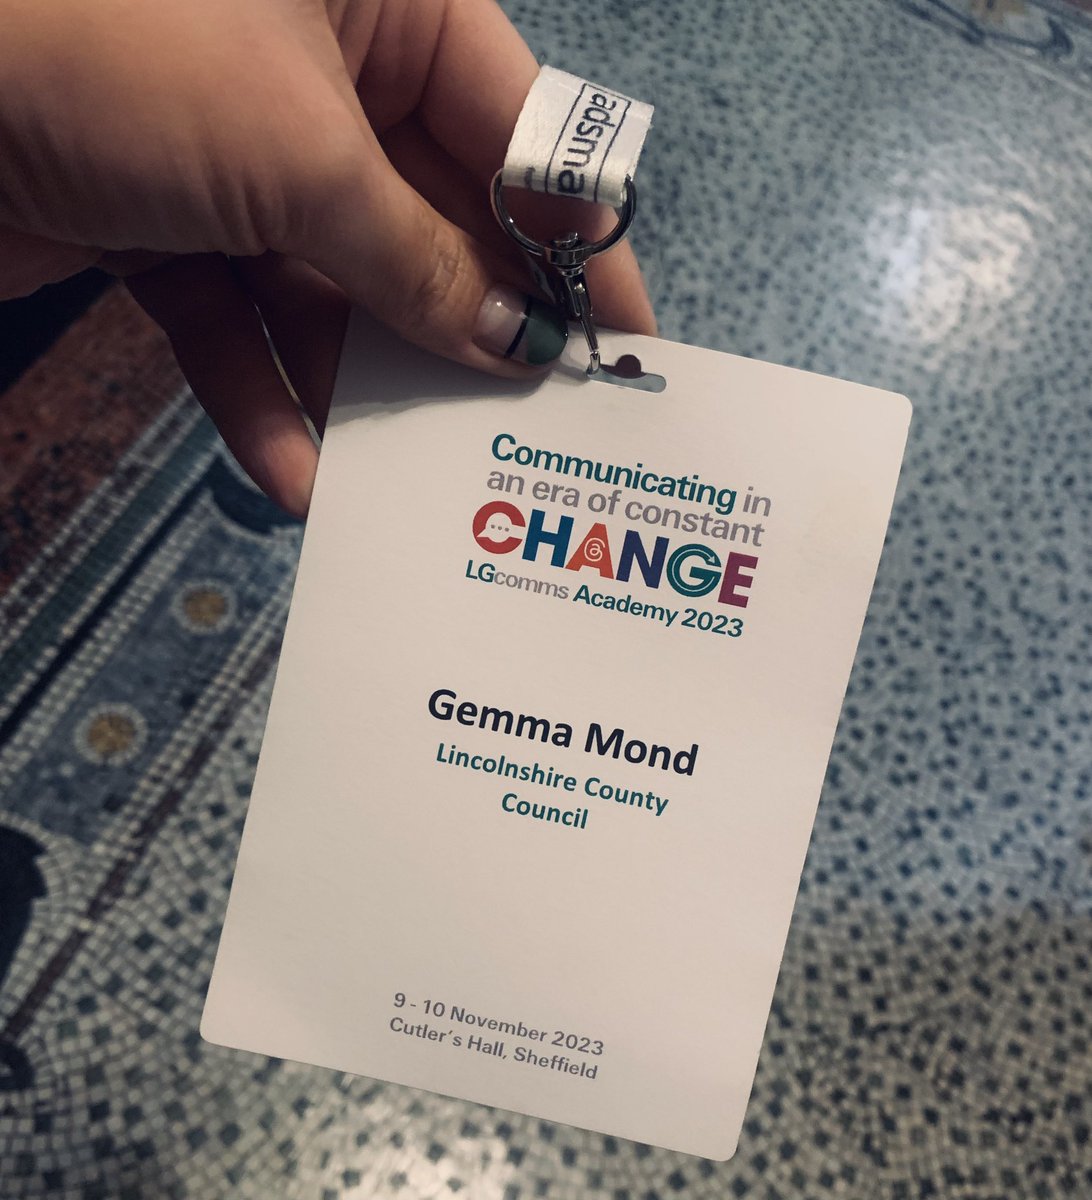 Really interesting couple of days at  #CommsAcad23. Lots to take away! Thanks for having us Sheffield.

@LGcomms @TheCutlersHall